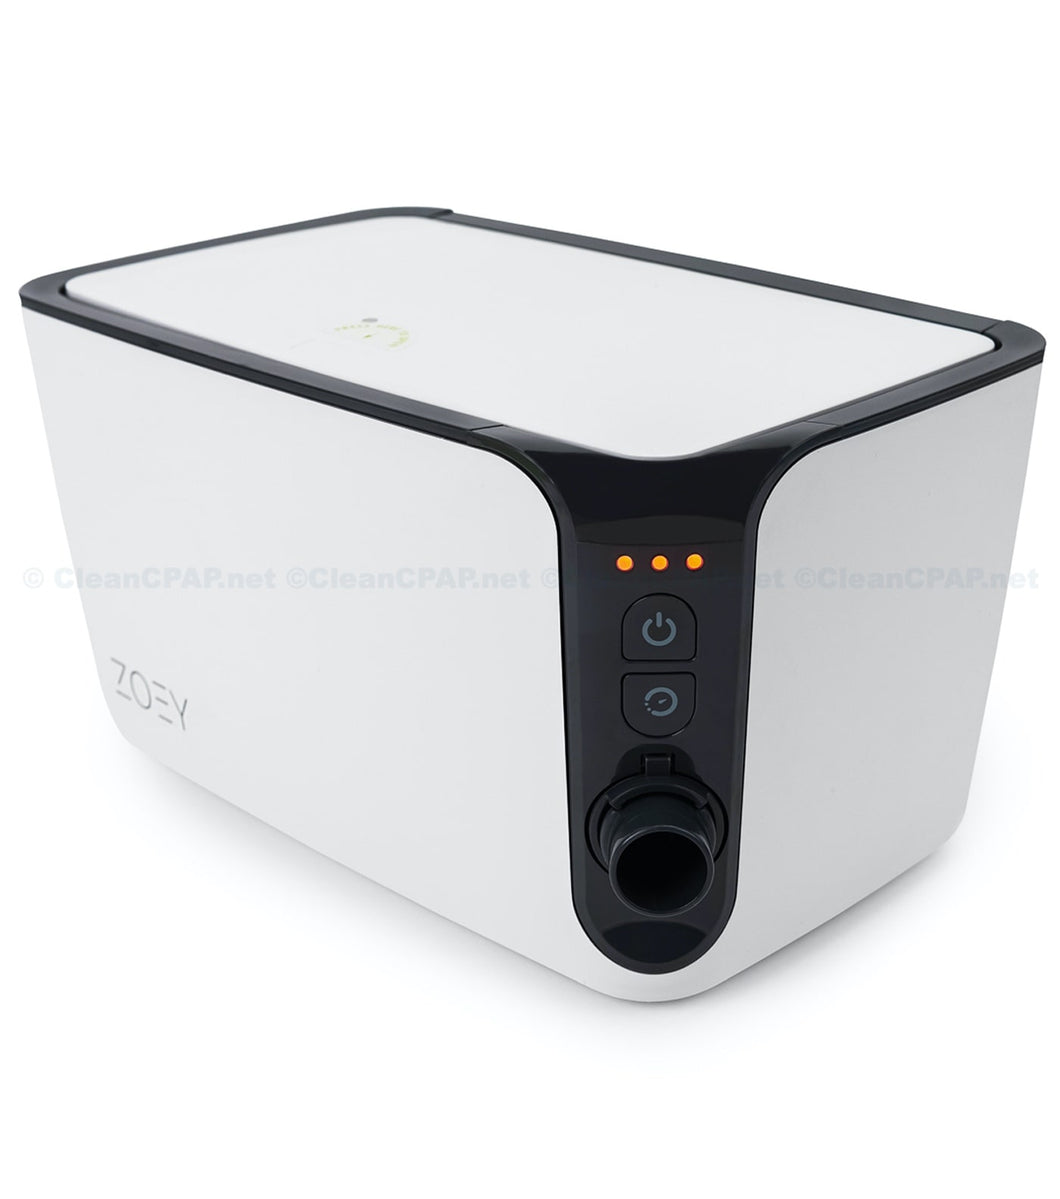 Zoey Cpap Cleaner